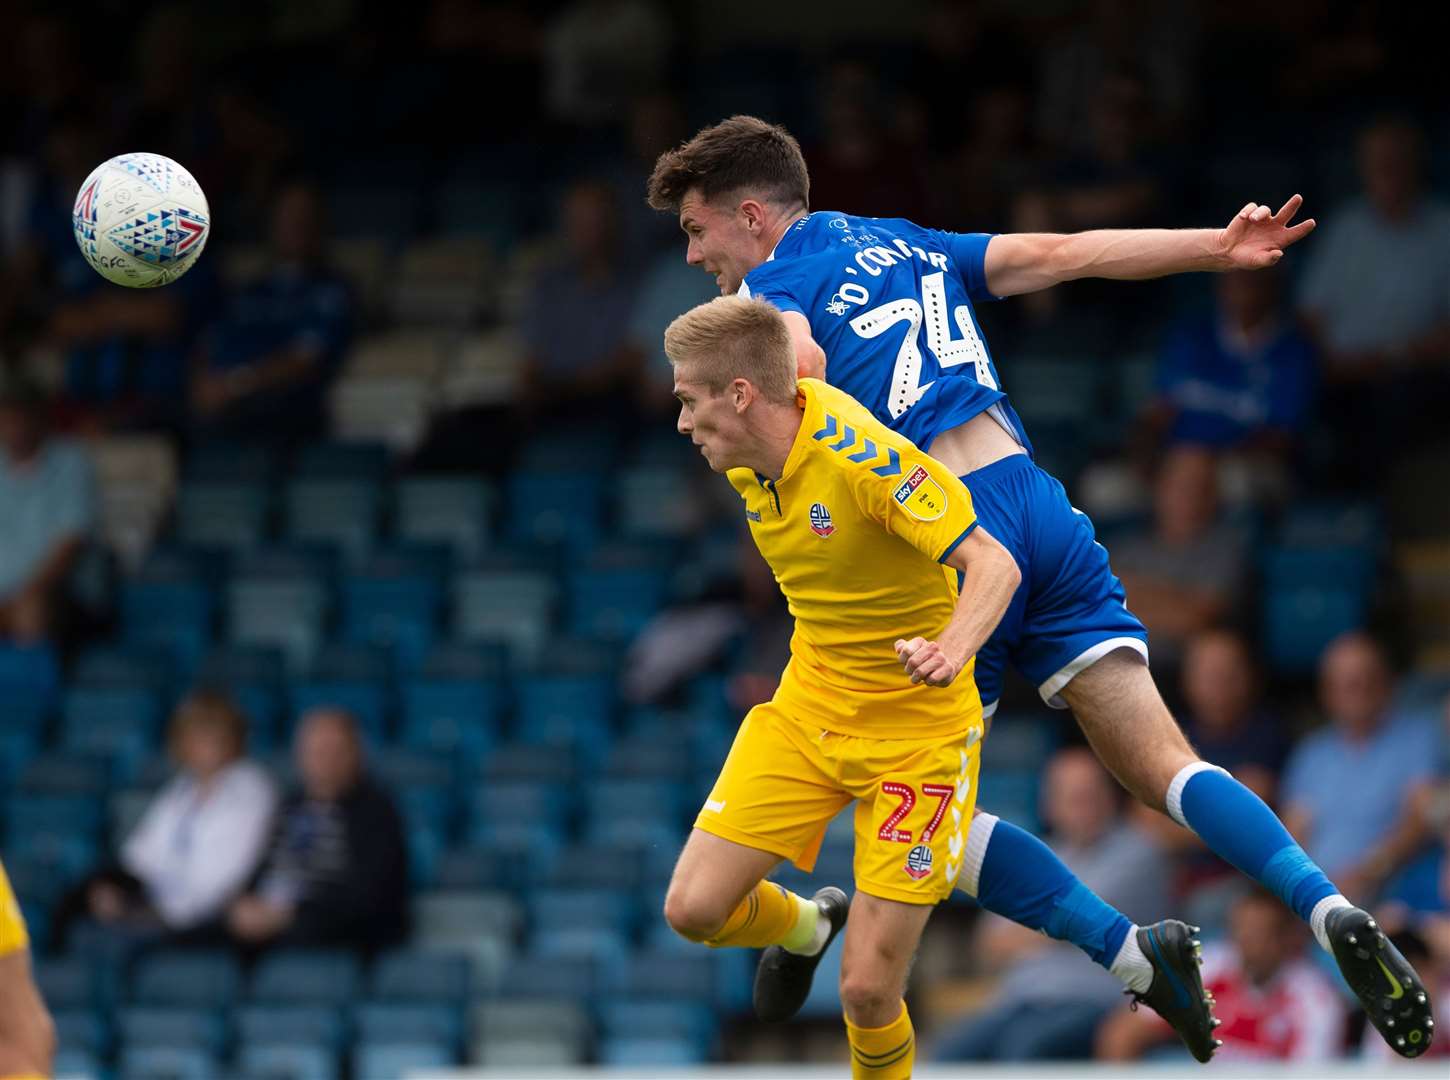 Tom O'Connor jumps with Ronan Darcy as the Gills take on Bolton Picture: Ady Kerry